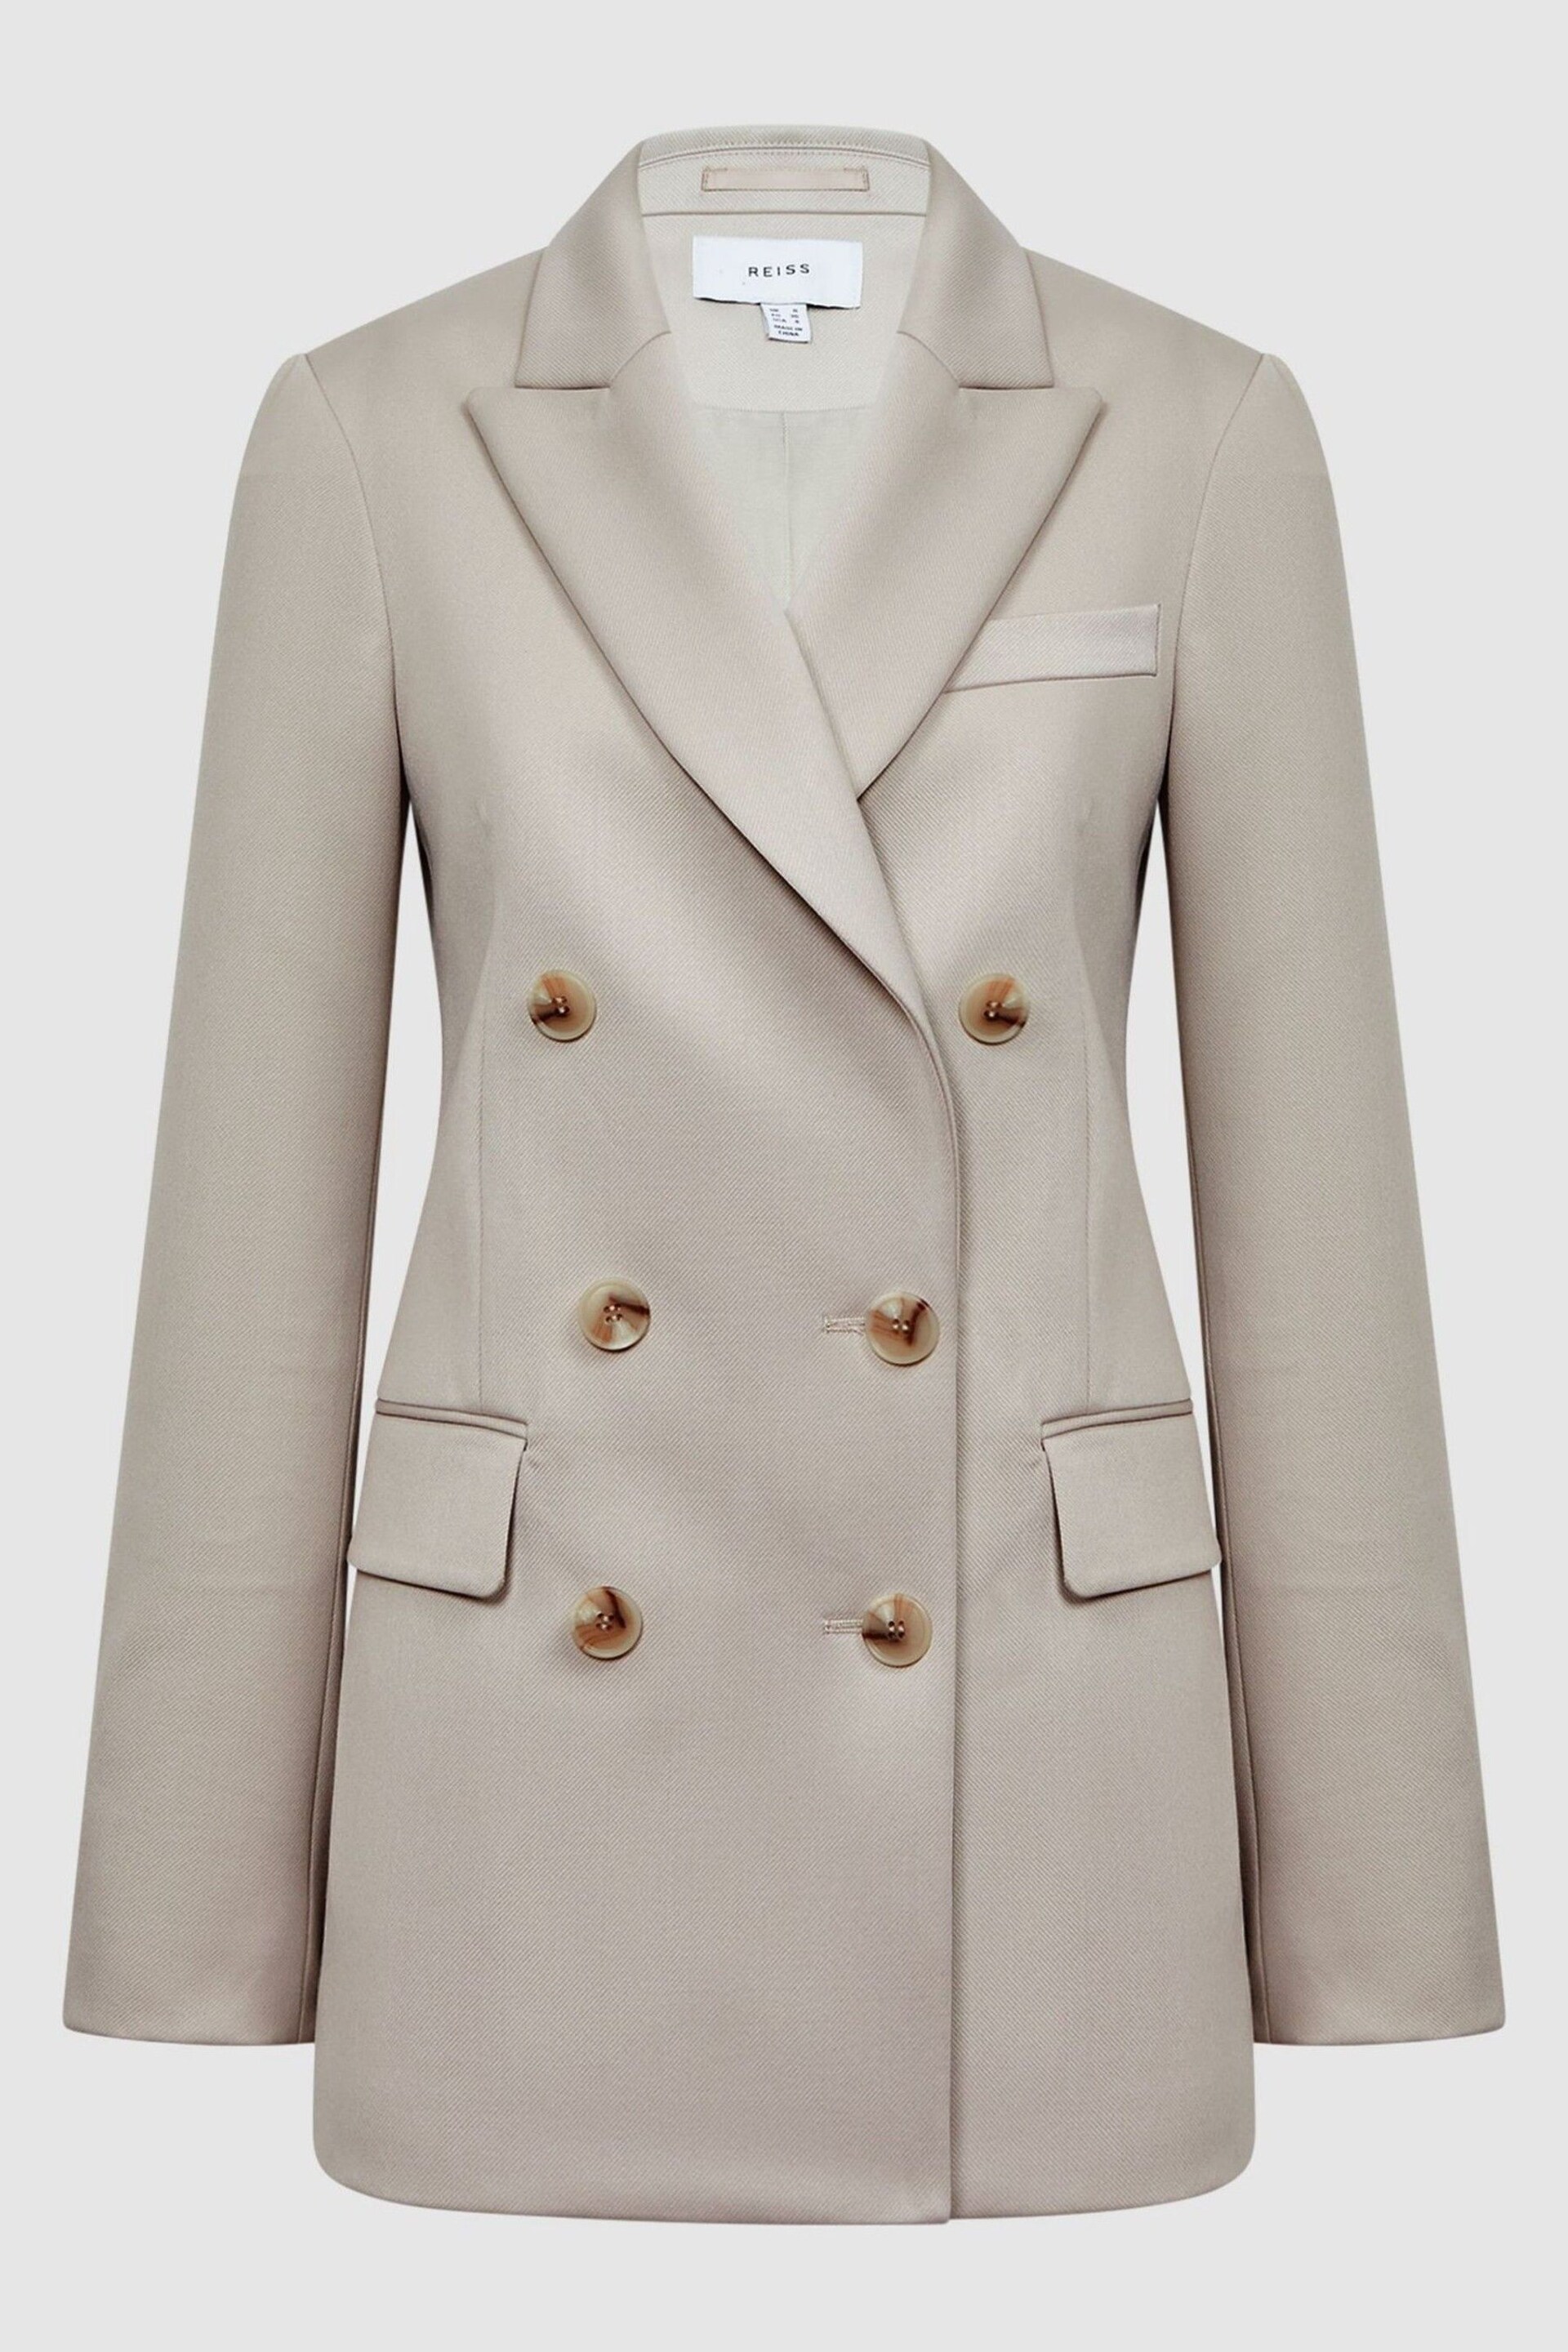 Reiss Neutral Astrid Petite Double Breasted Wool Blend Blazer - Image 2 of 6